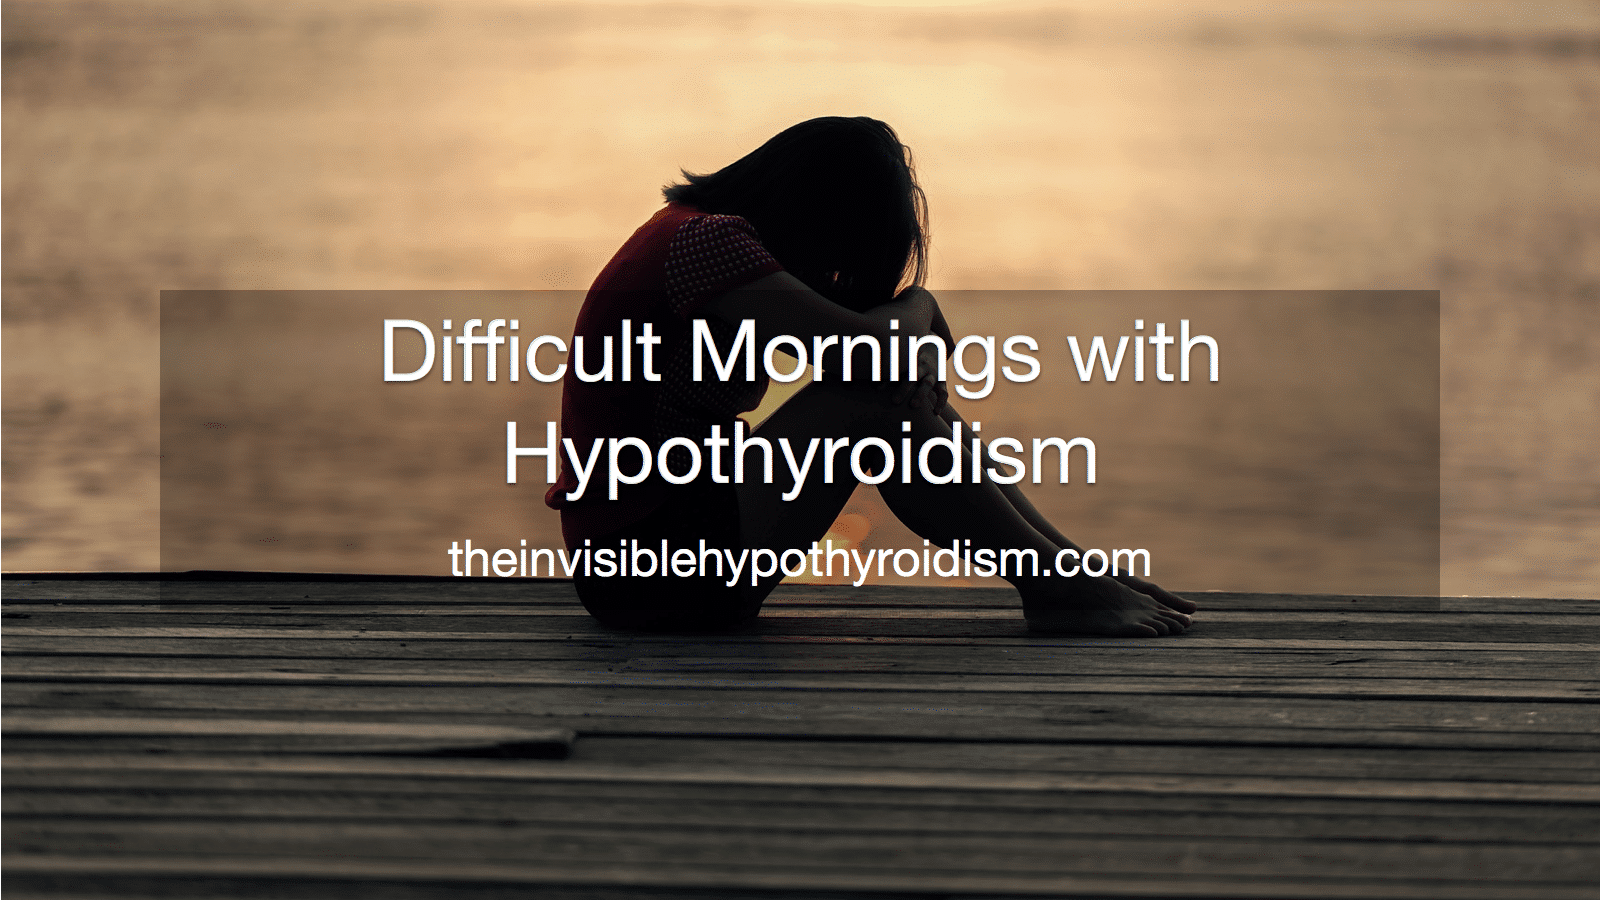 Difficult Mornings with Hypothyroidism